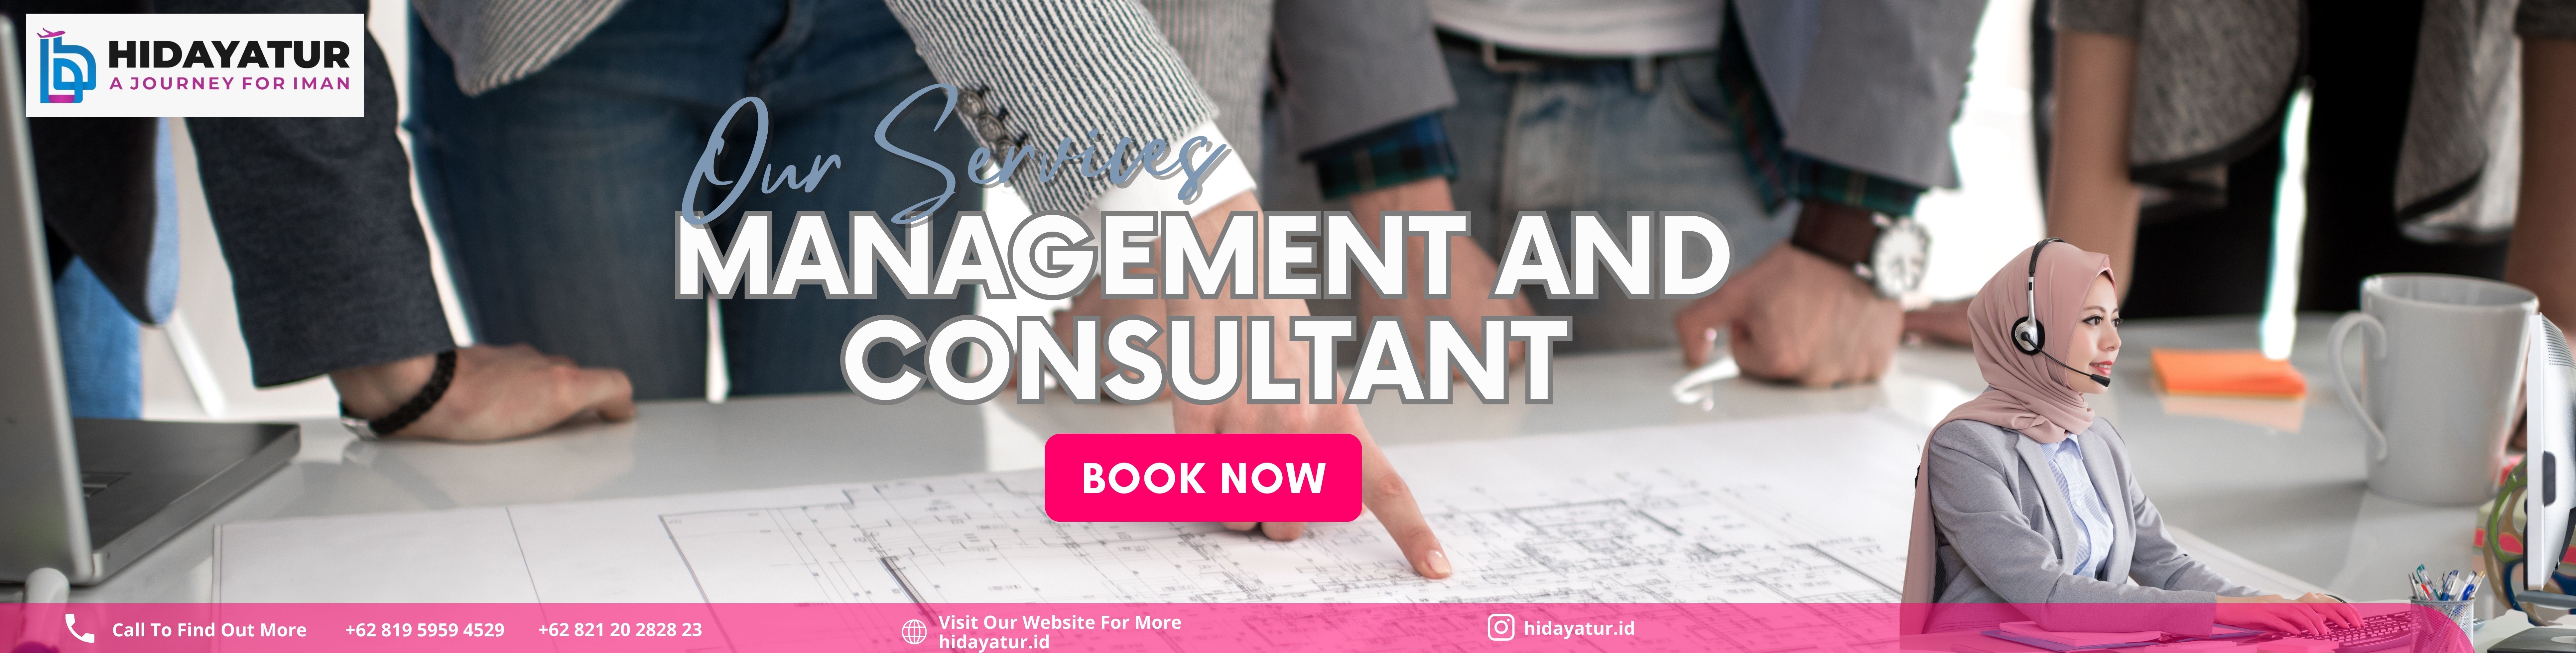 management and consultant